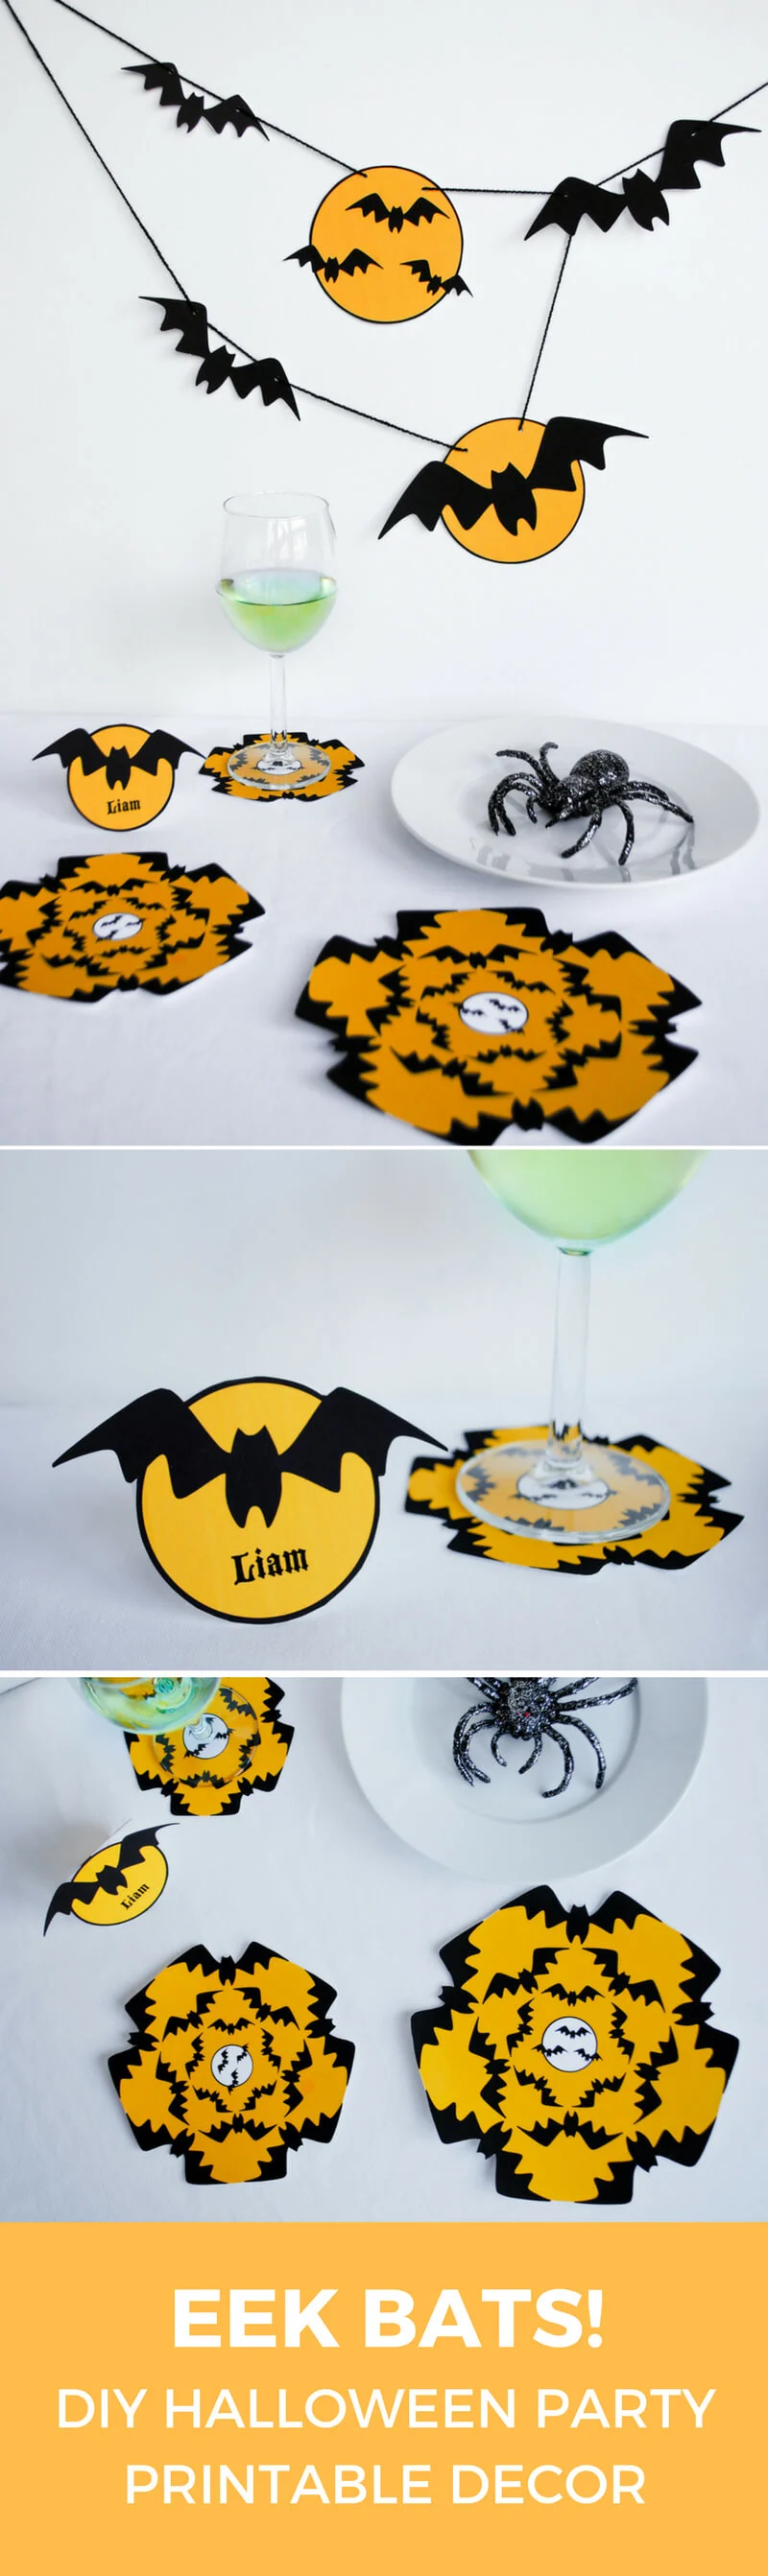 Eek Bats! Printable Halloween party decorations including bat Halloween banner, geometric bat "doily" coasters and decorations, and personalized Halloween placecards | printable Halloween banner | last-minute Halloween | easy Halloween decorations | Bats #halloween #halloweendecorations #printables #bats #tablescape #decorations #halloweenbanner